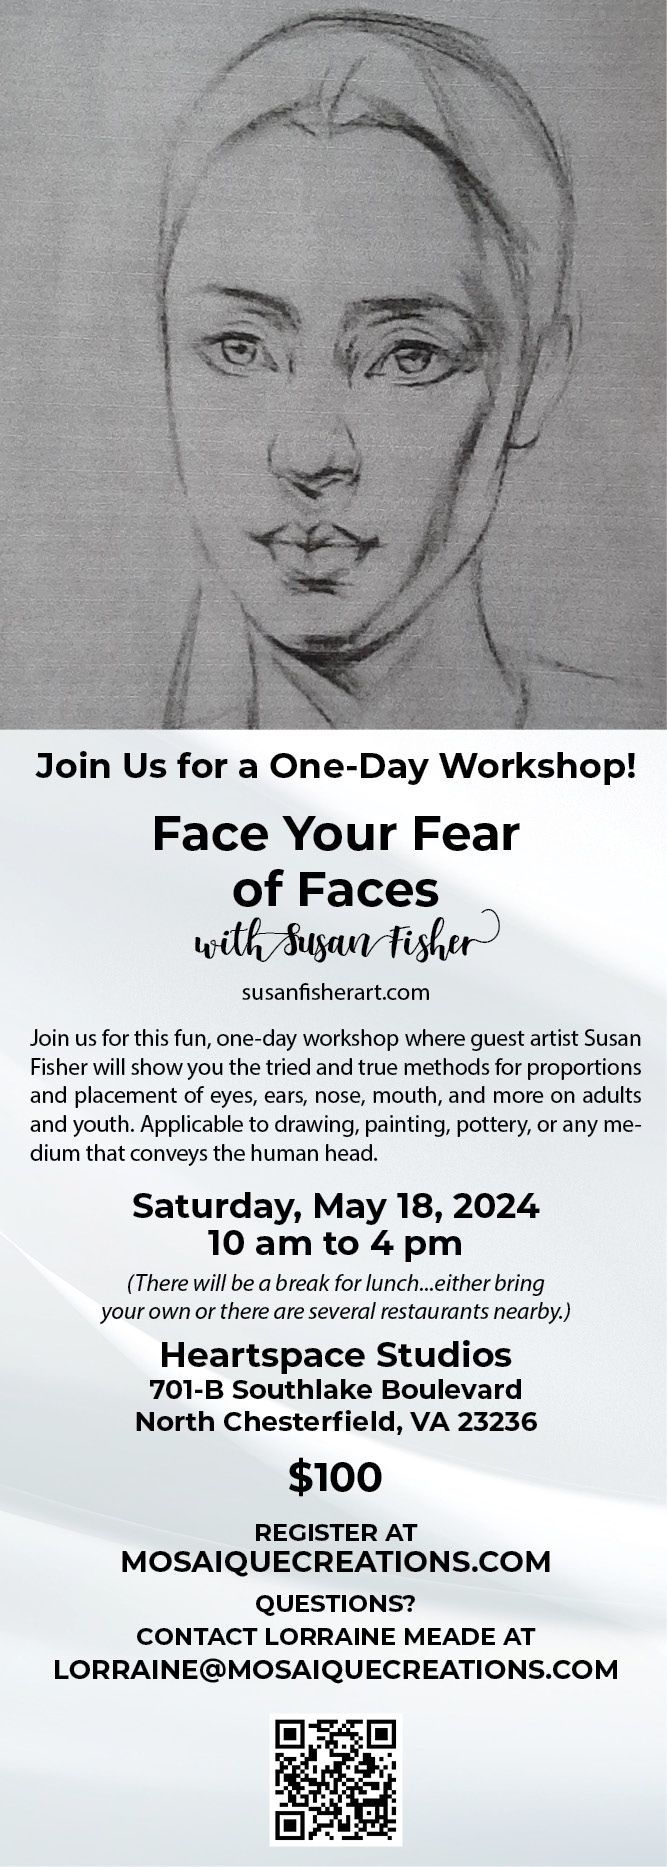 FACE YOUR FEAR OF FACES workshop with Susan Fisher